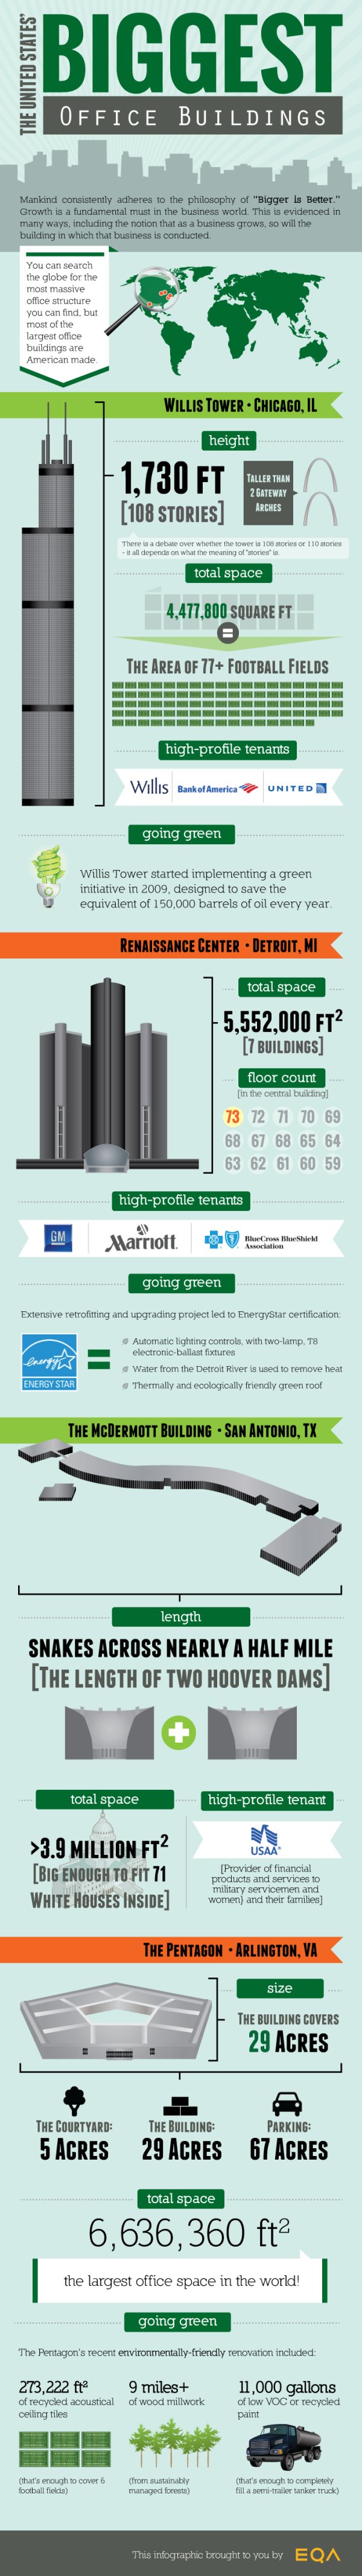 Learn about the greenest office buildings